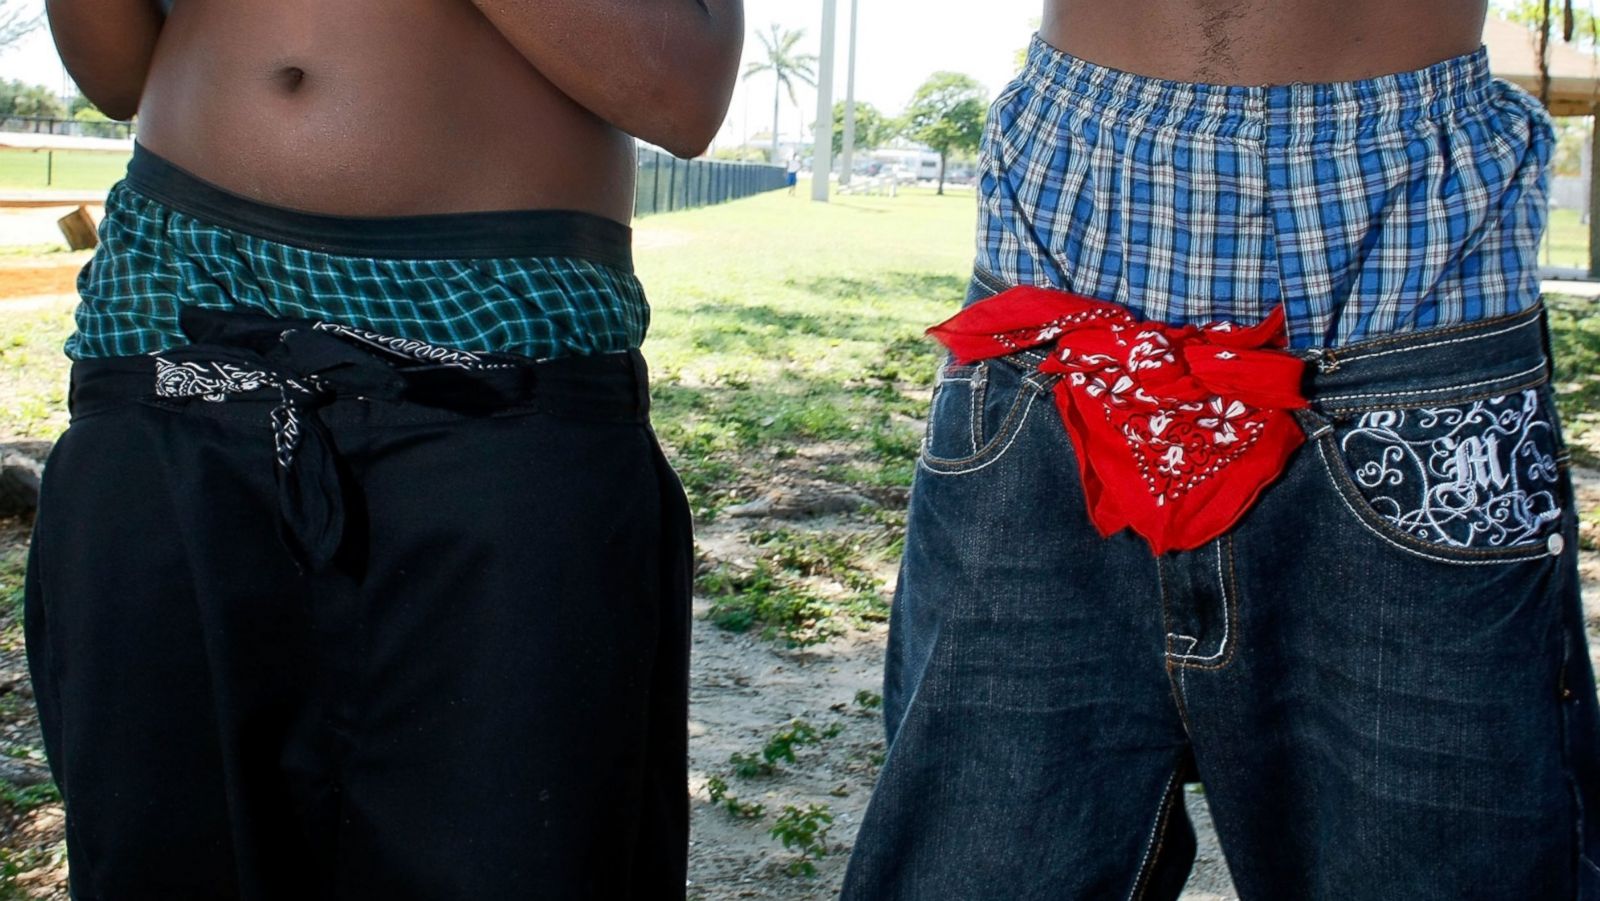 Mens pants sagging showing off their dick